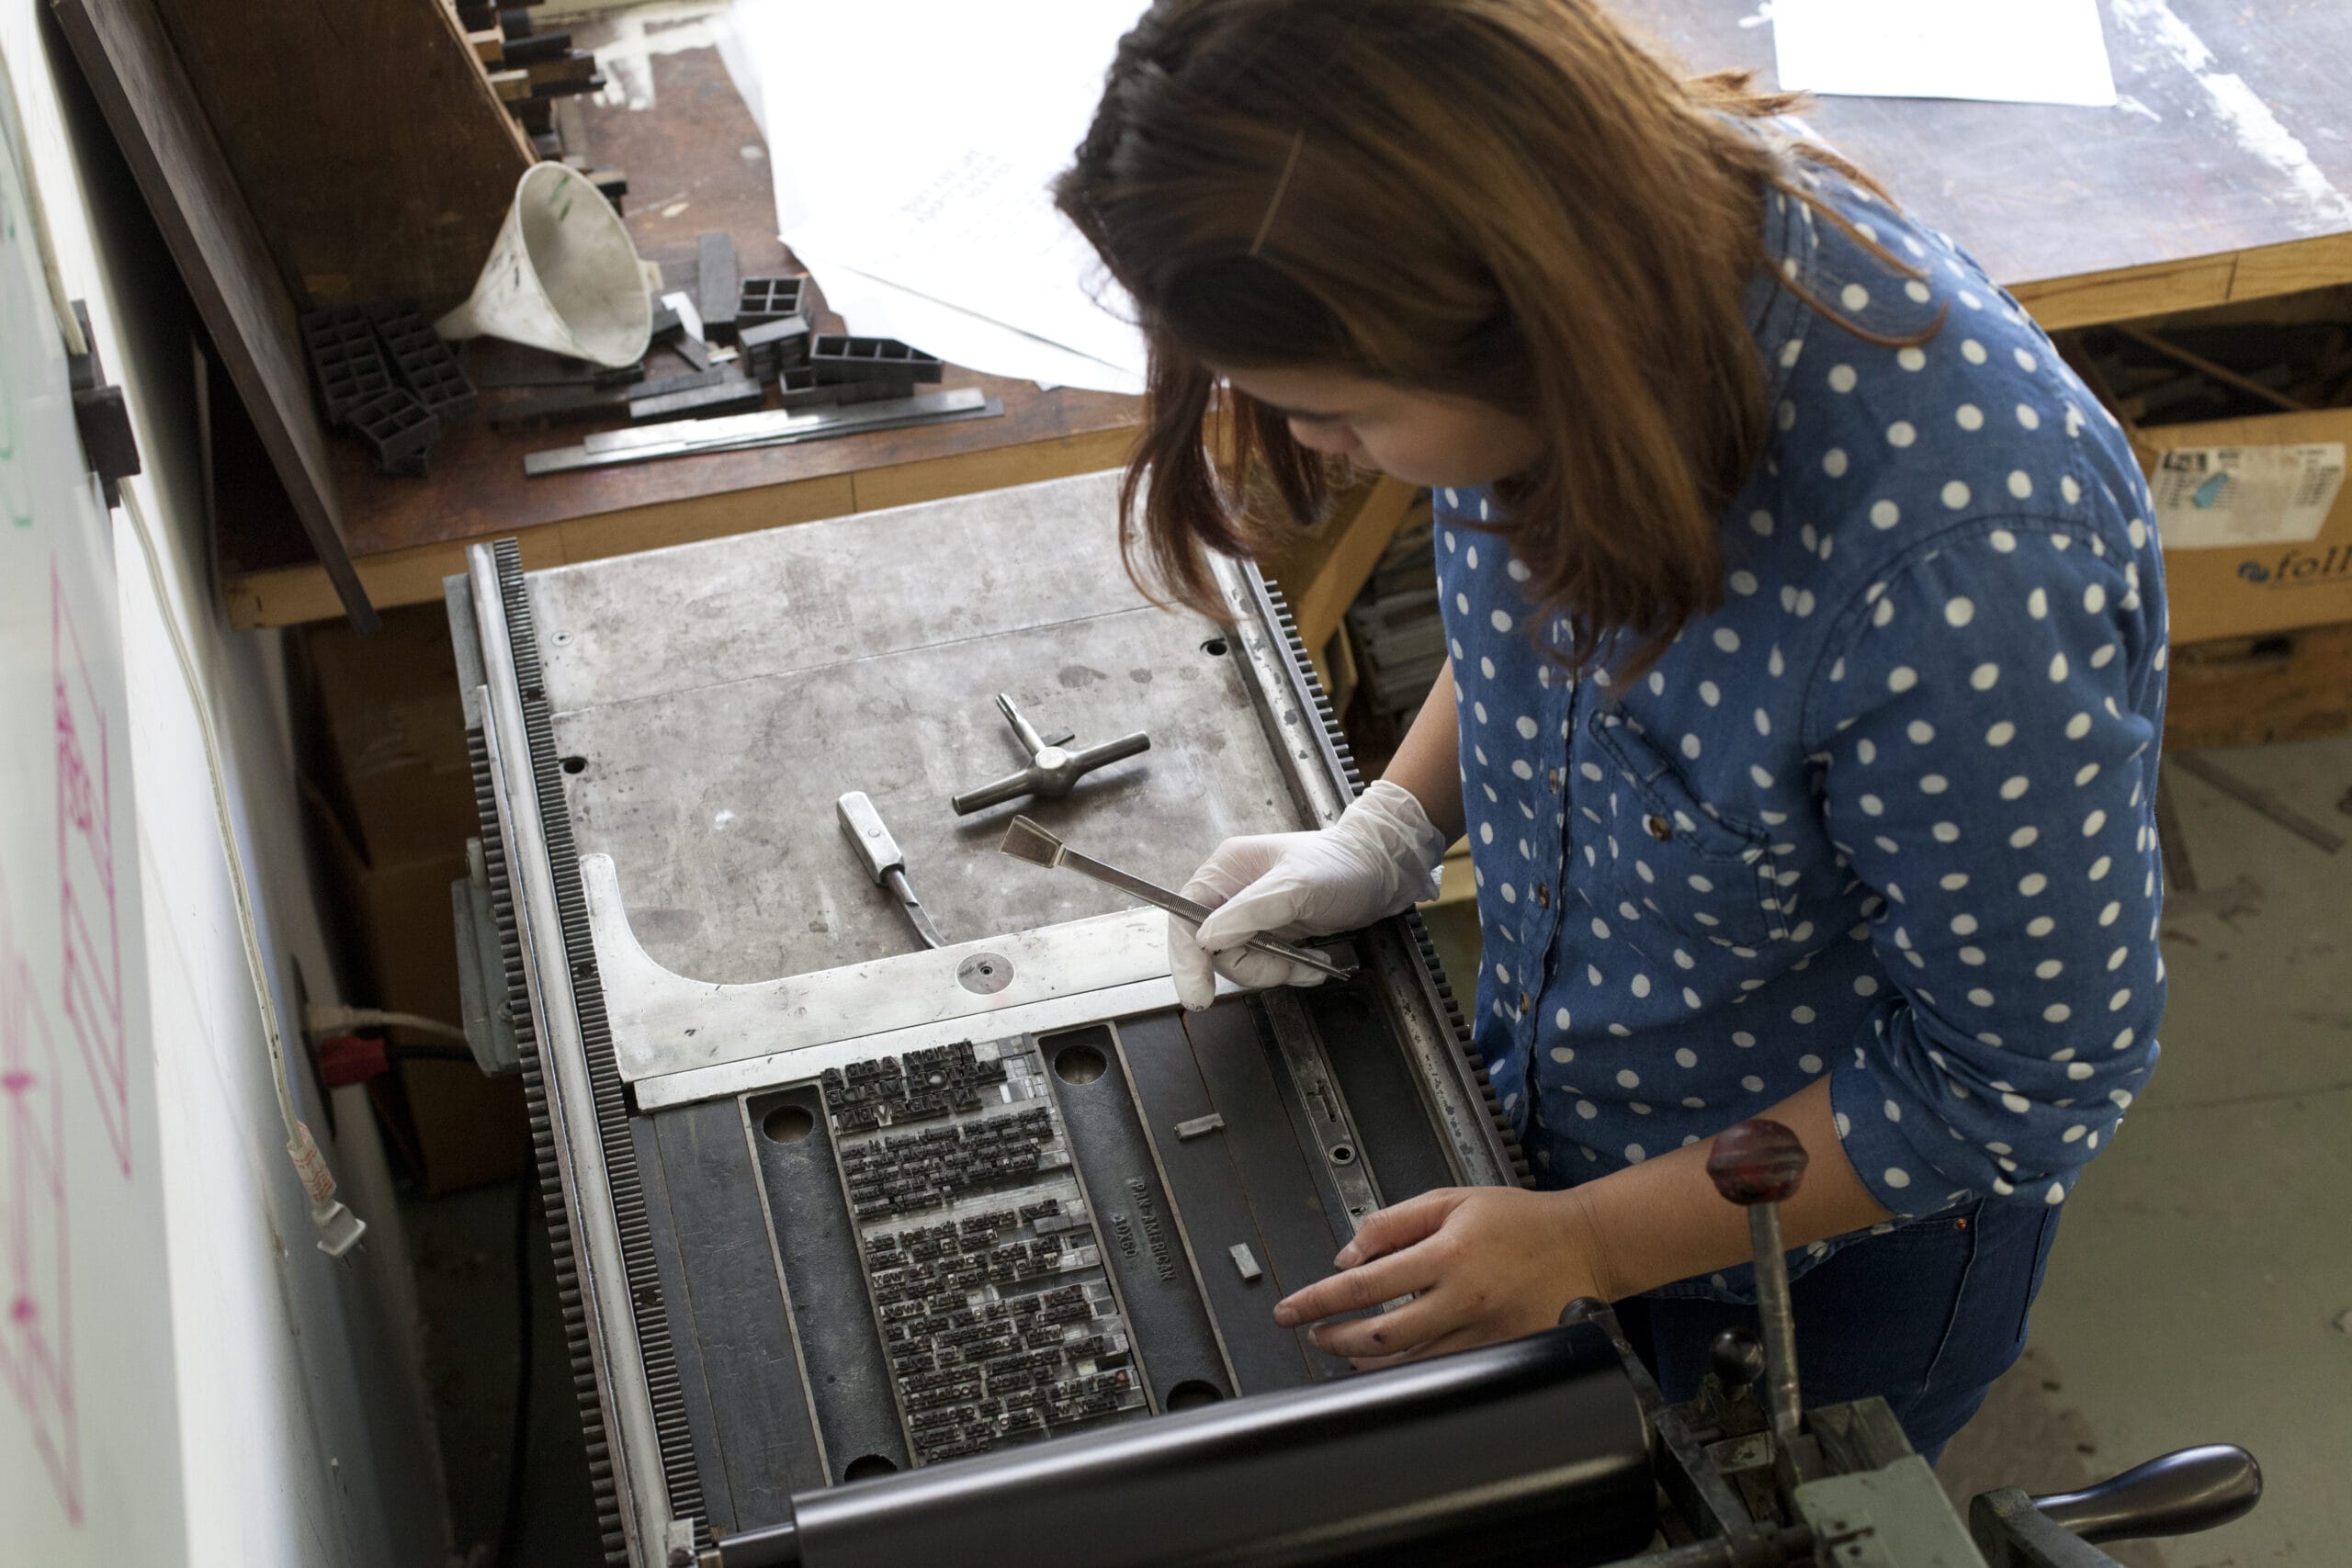 A student looking down at a letterpress